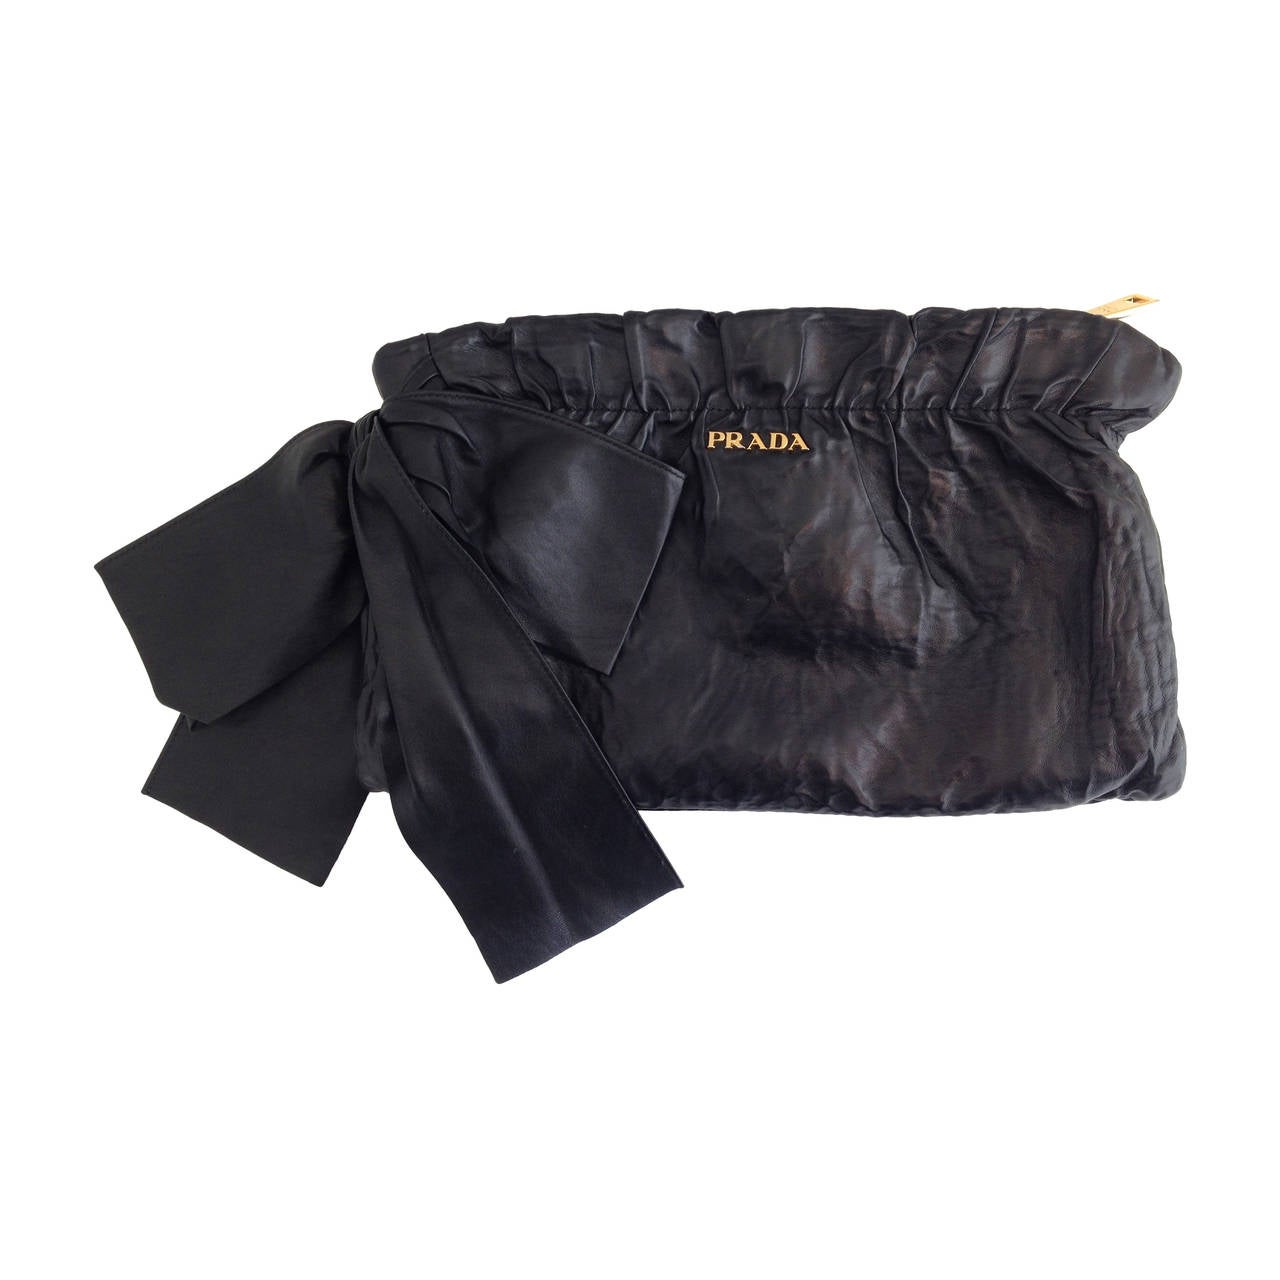 Prada Black Crinkly Leather Clutch with Bow For Sale at 1stdibs  